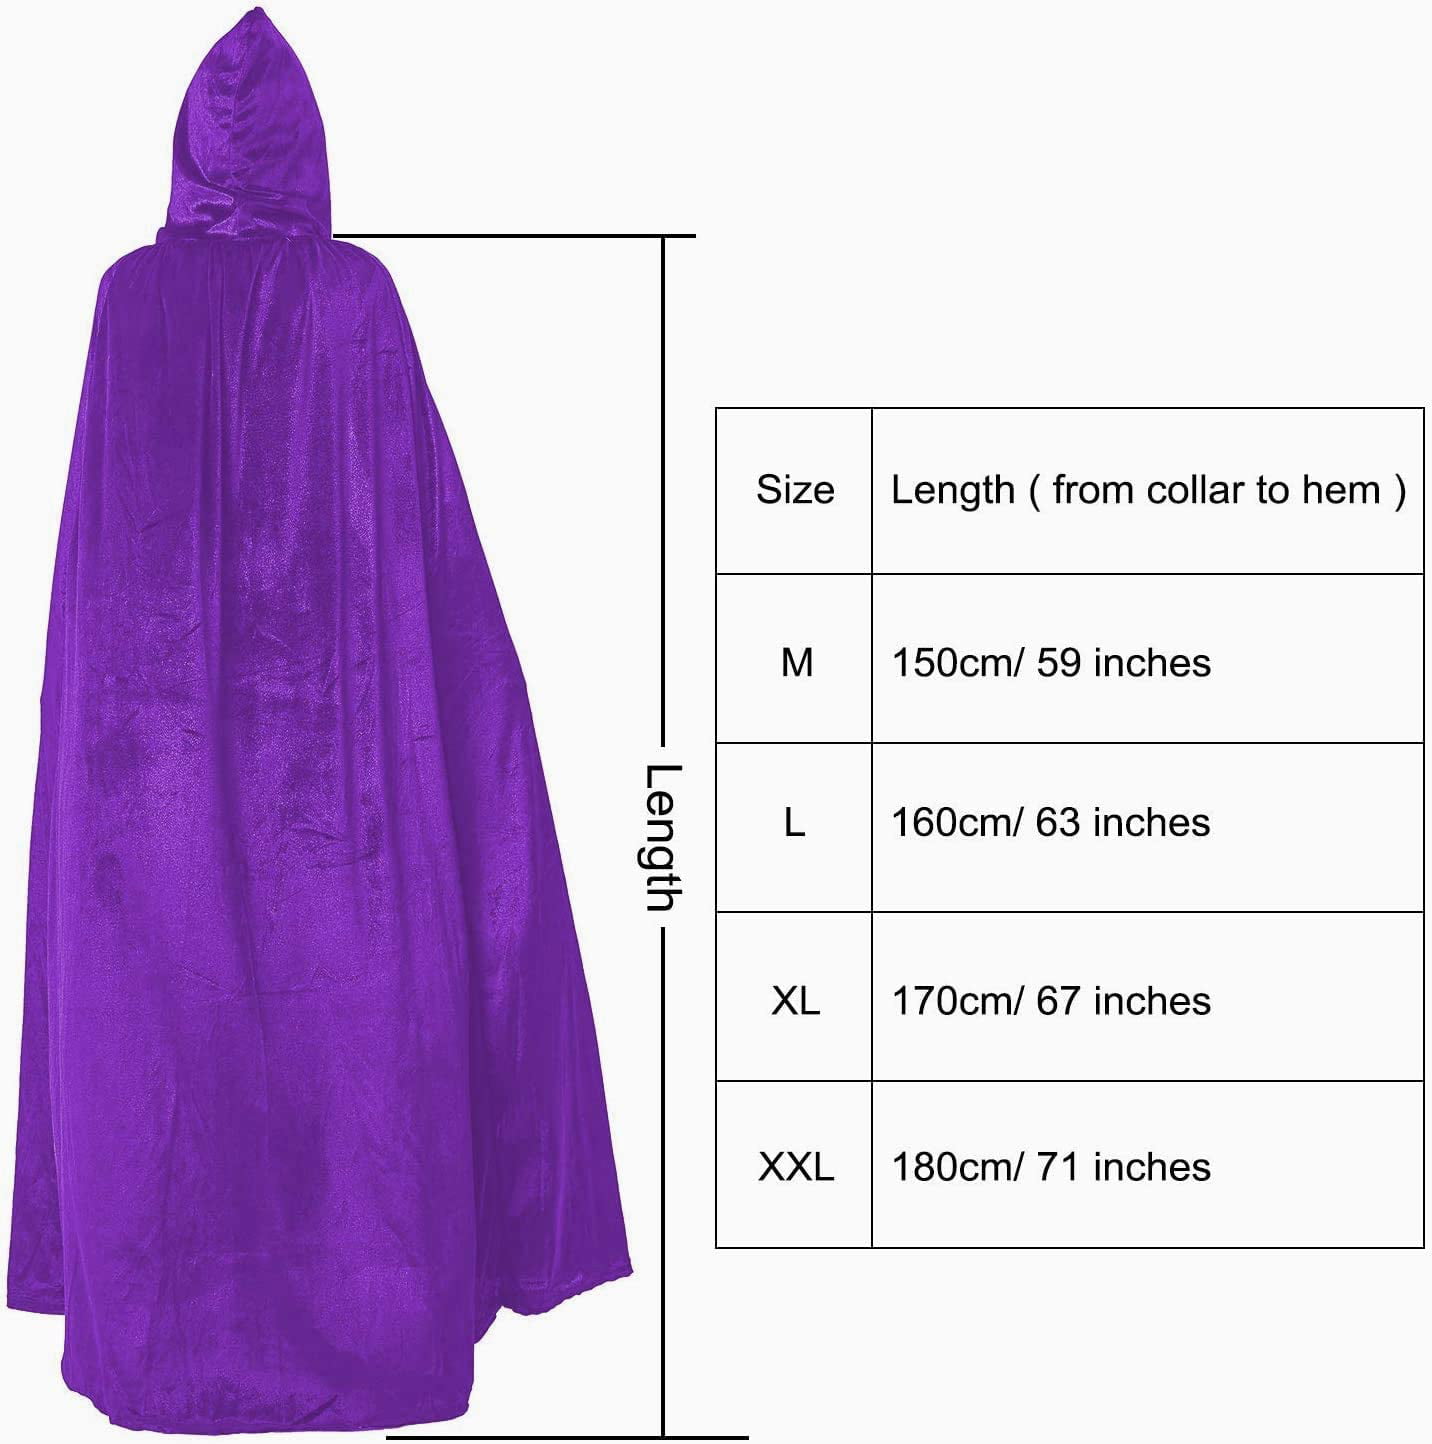 Halloween Unisex Velvet Cape/Cloak Costumes with Hood for Women/Men Full Length 77 Inches Open Closure with Lace for Christmas Halloween Parties Cosplay（Purple 